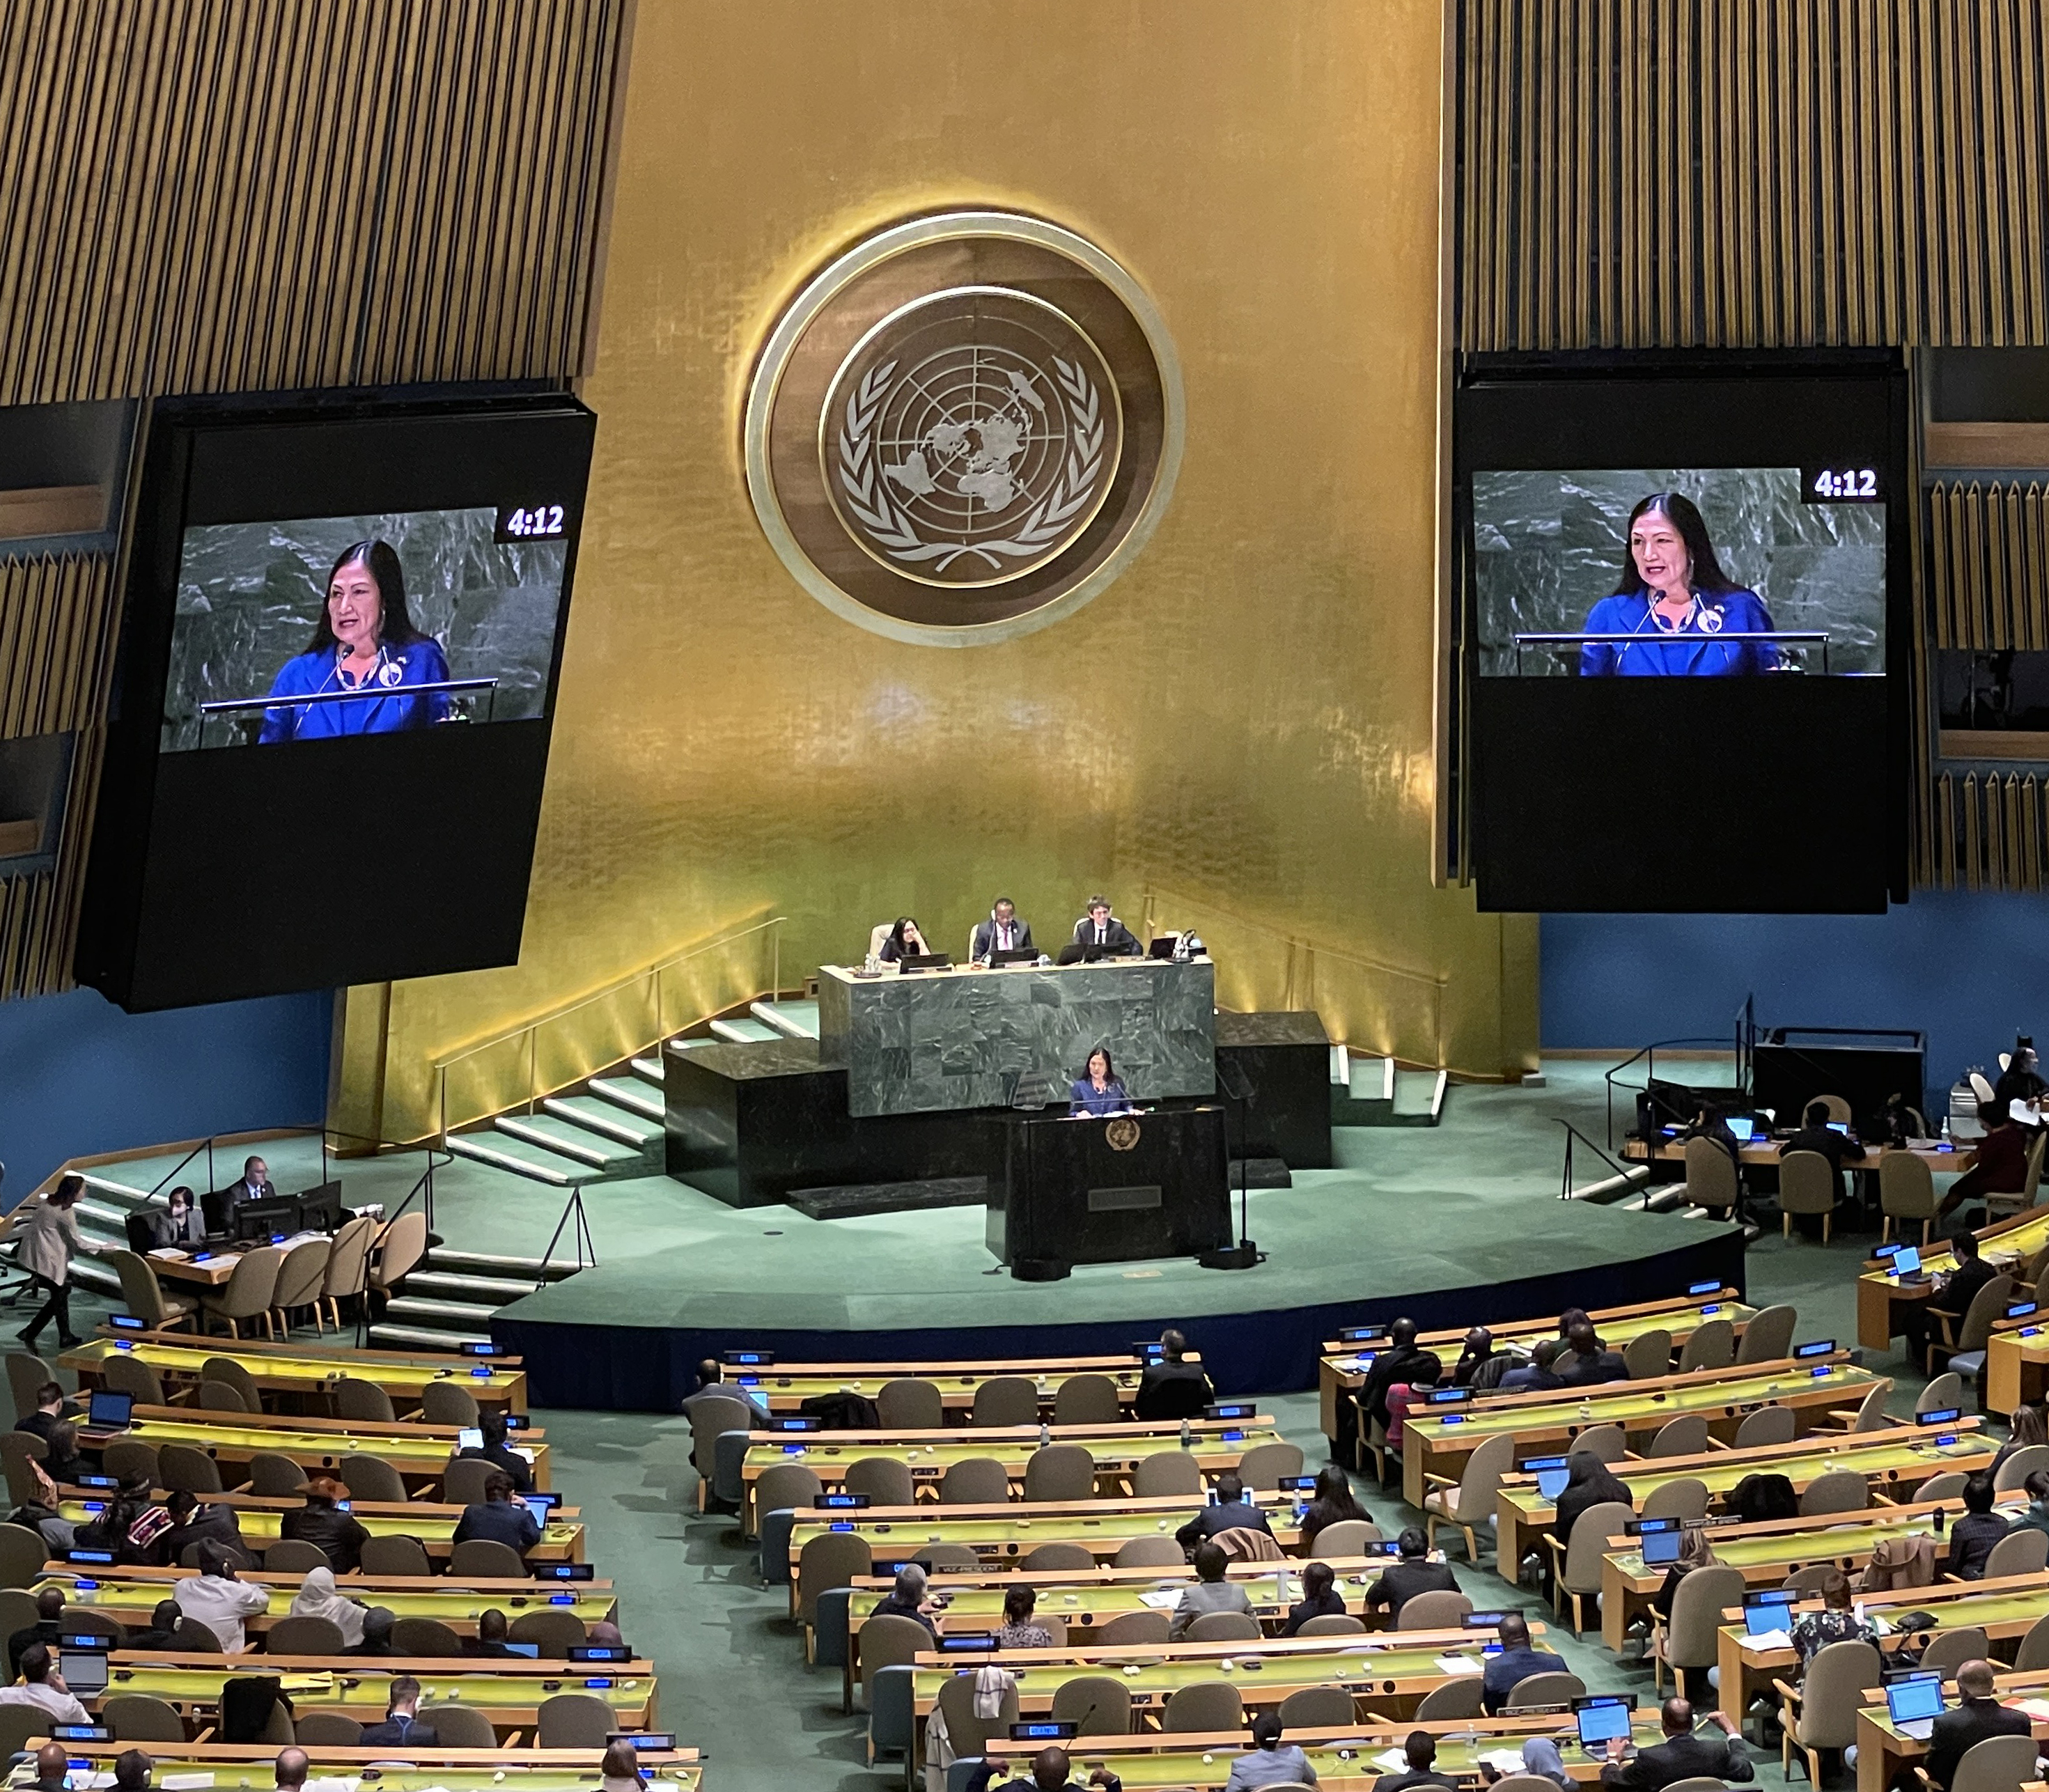 In a large auditorium in front of UN logo, a speak addresses the audience